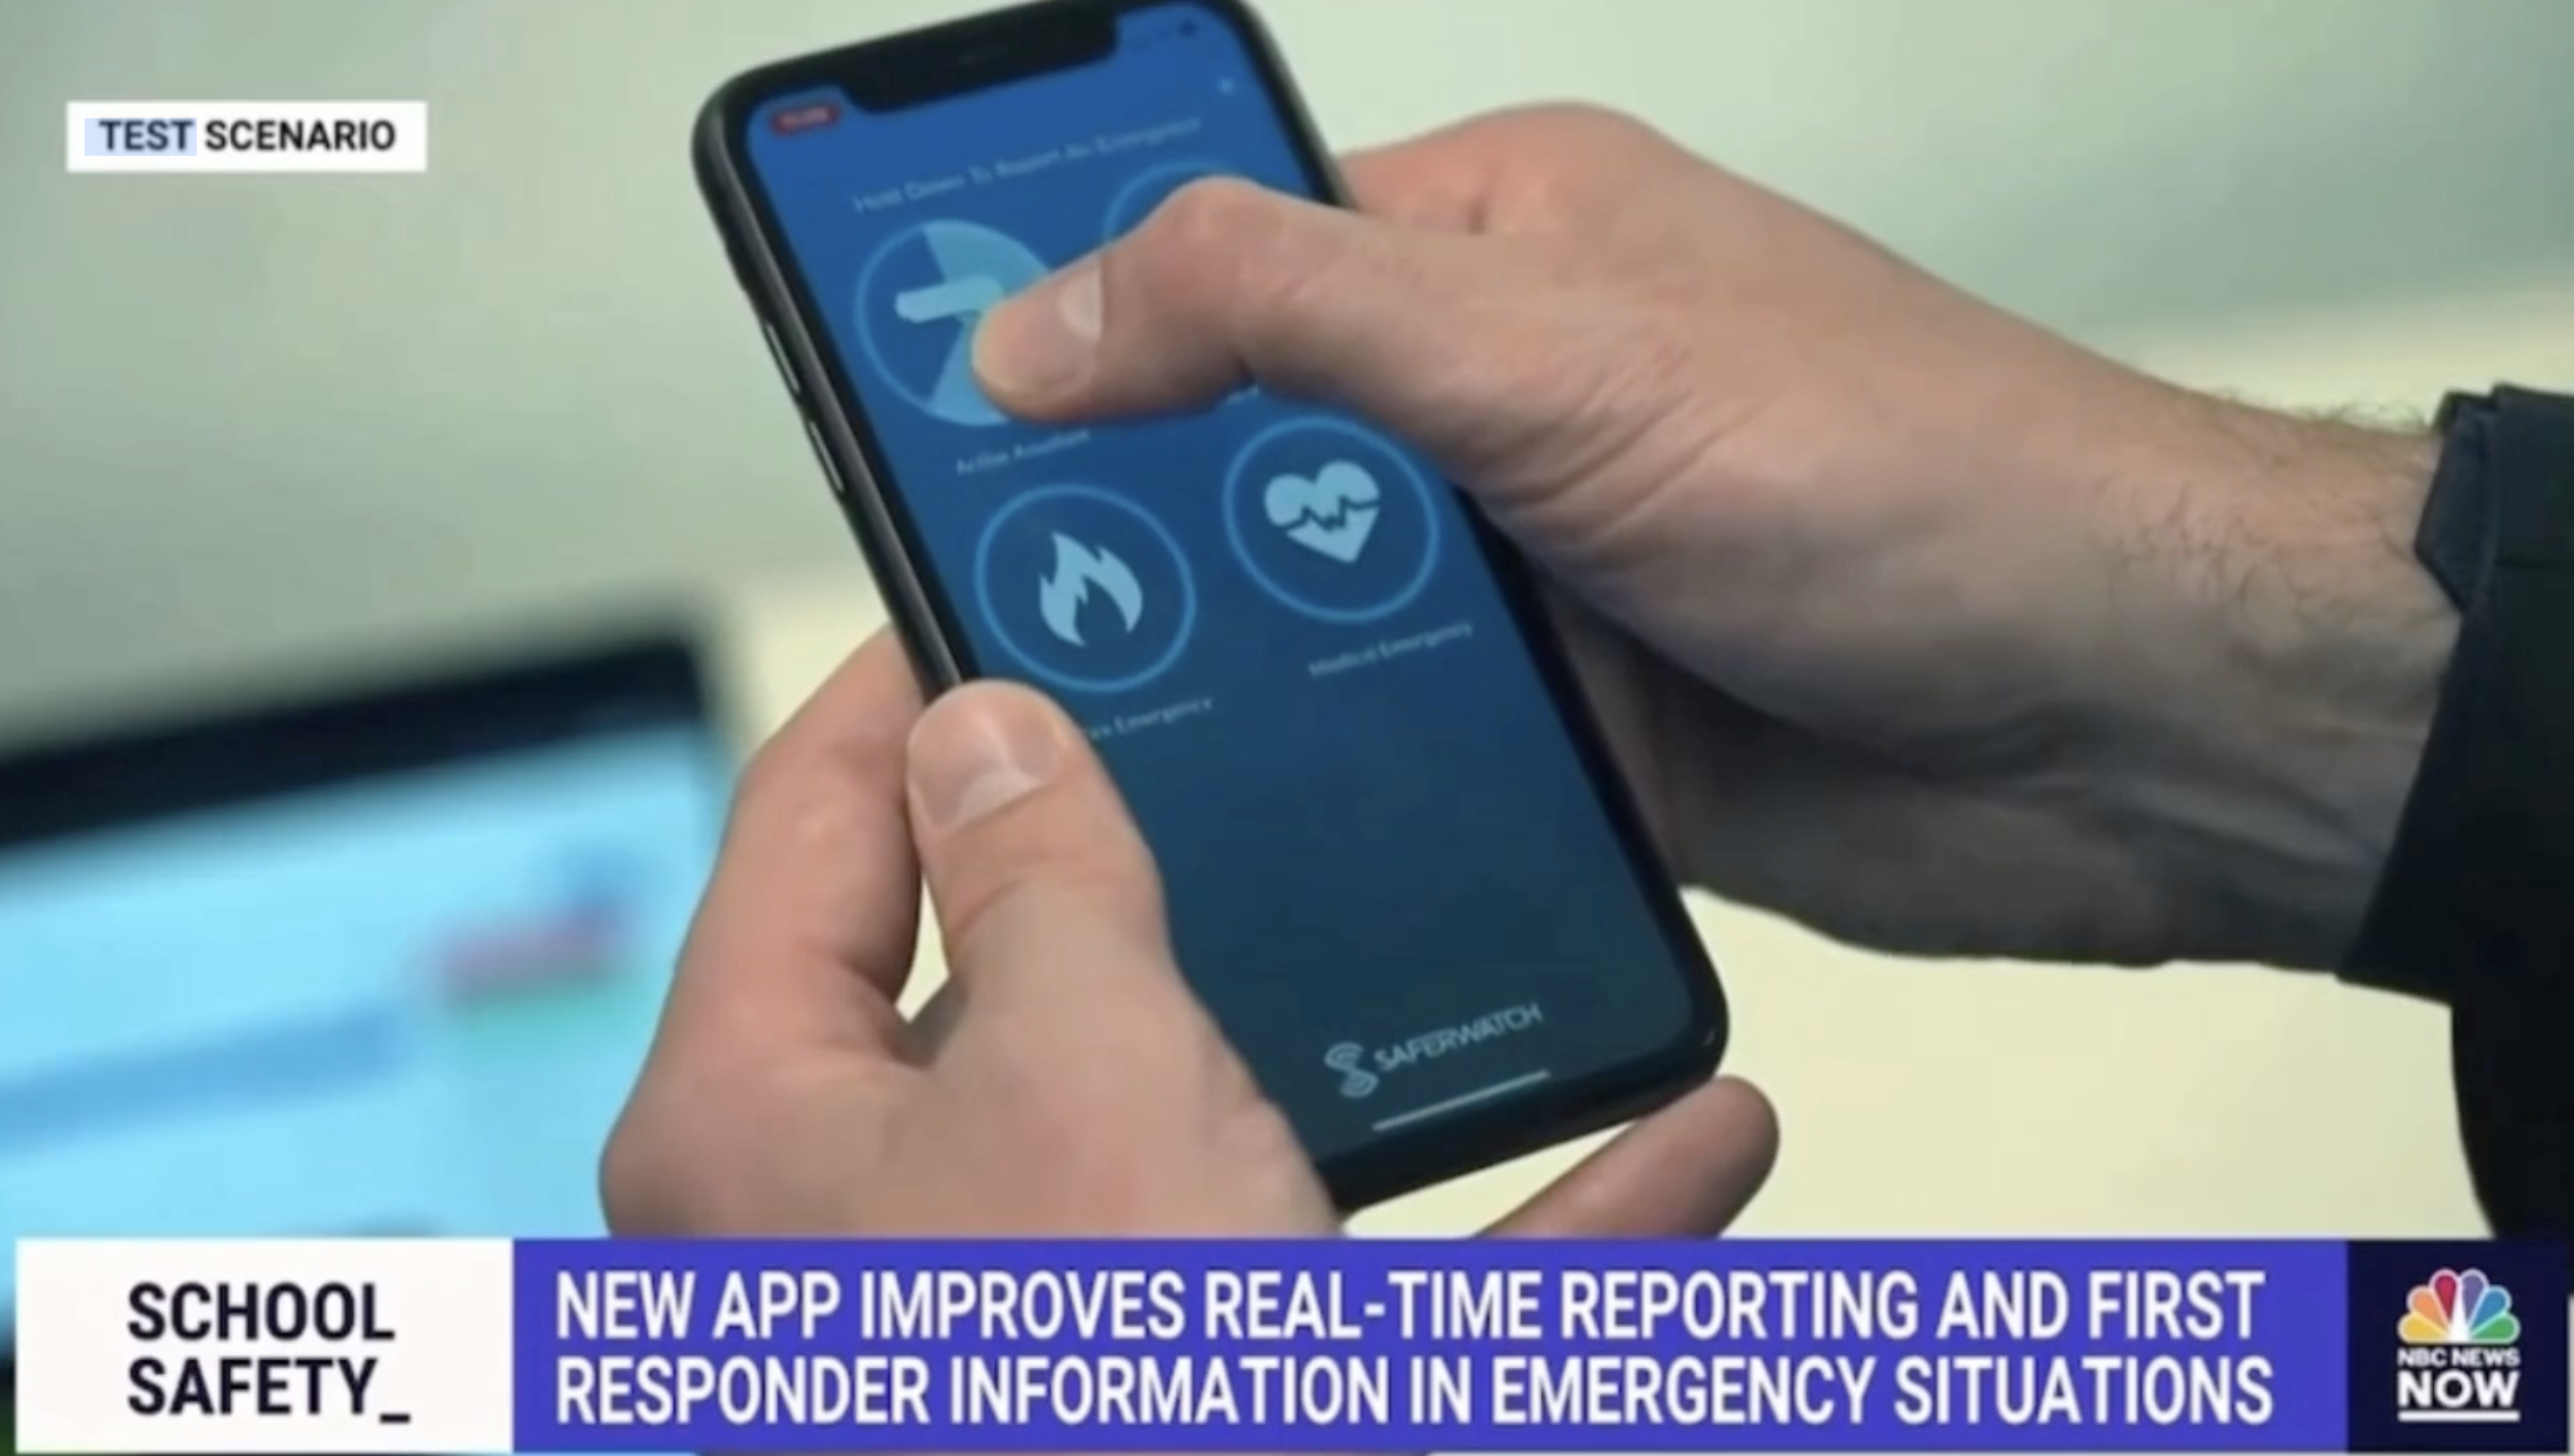 New app improves real-time reporting in emergency situations